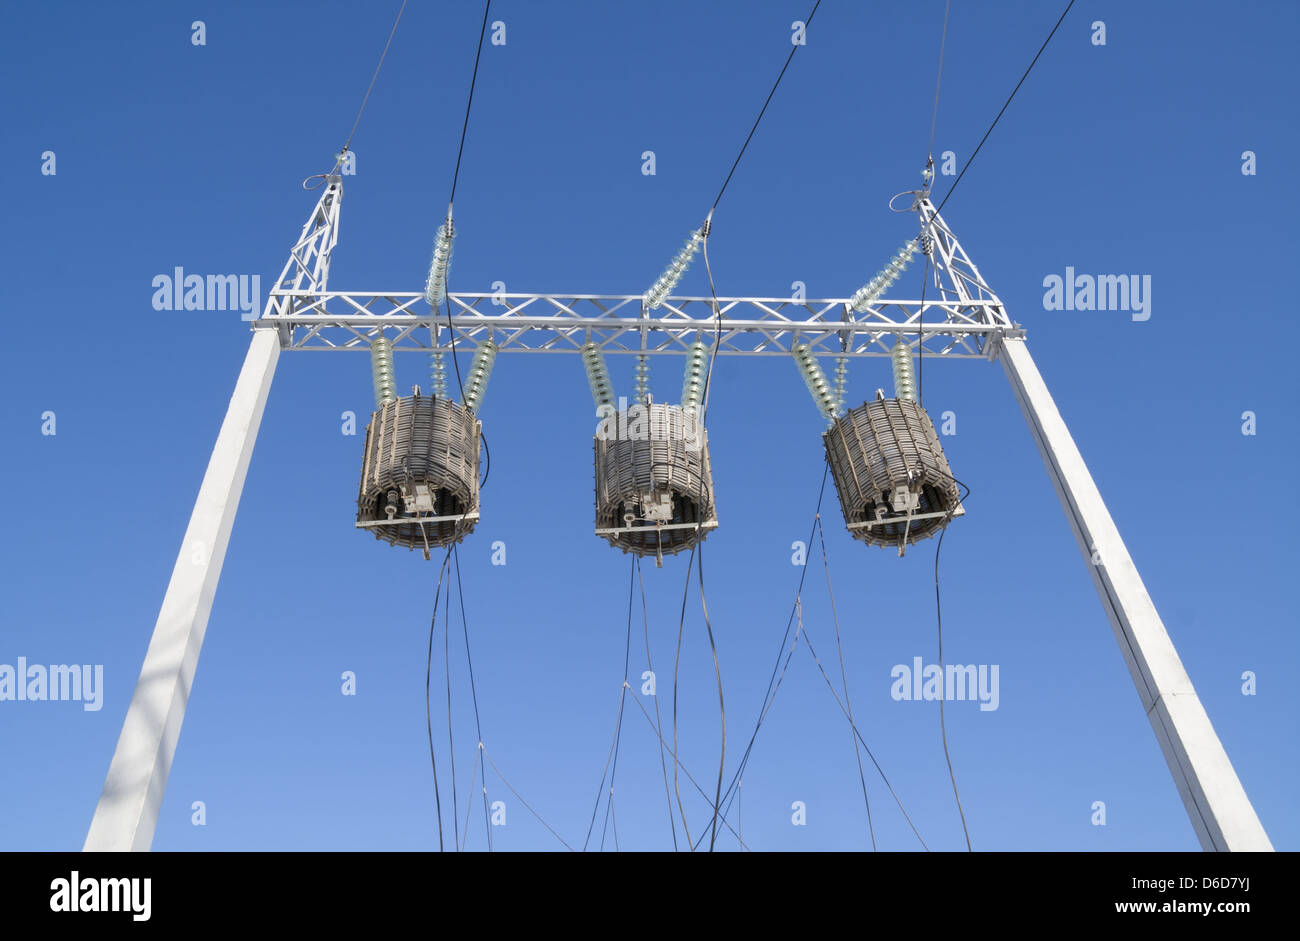 Transformers of high energy against the sky Stock Photo